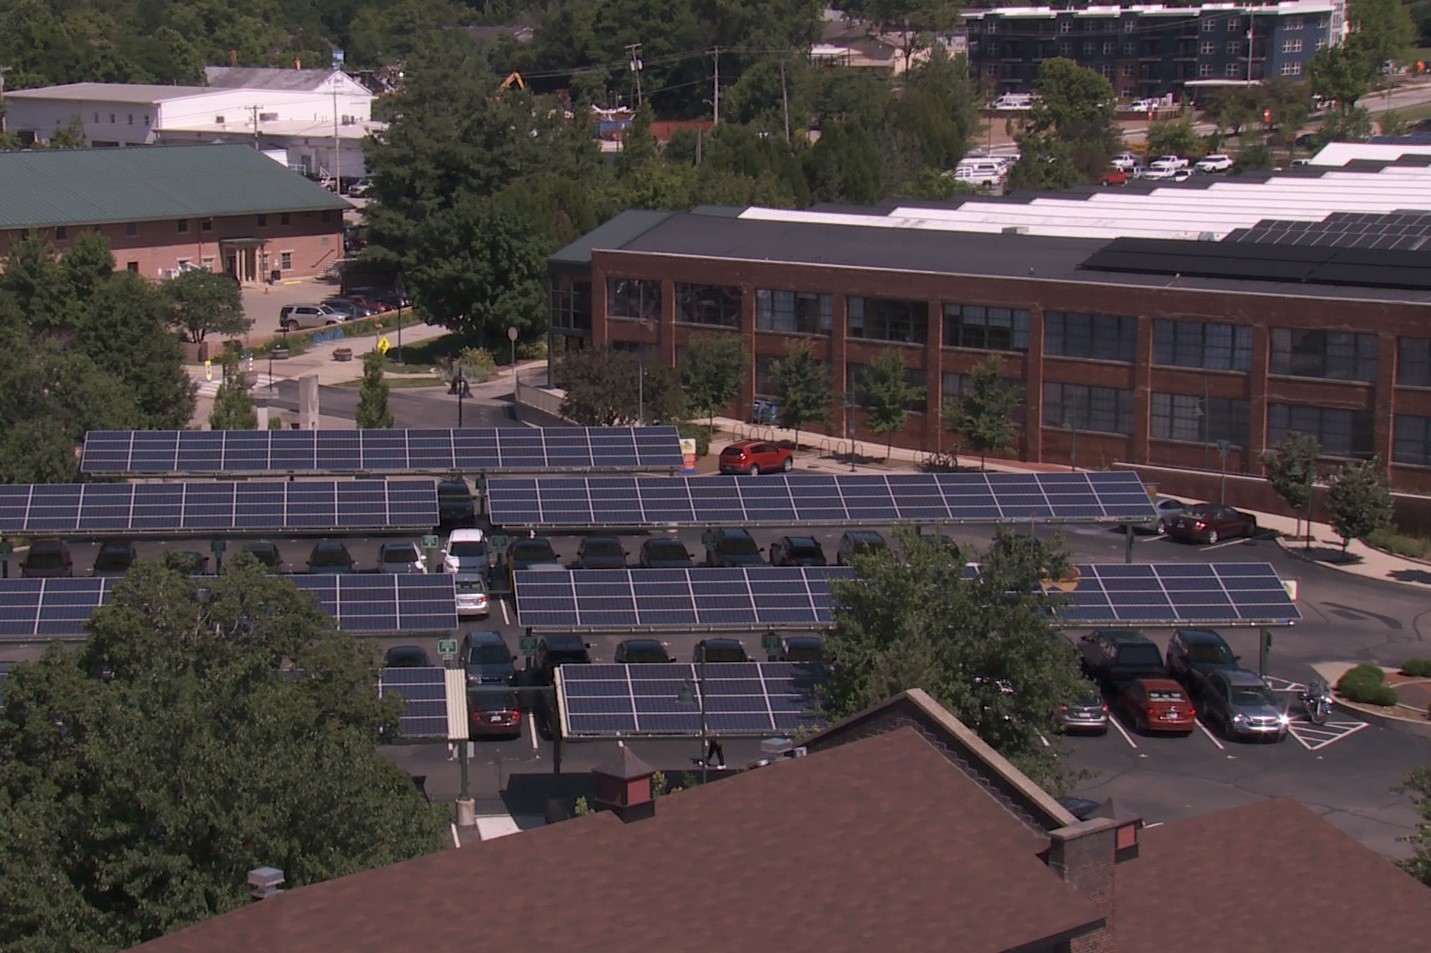 Solar panels on top of the car shelters in the City Hall parking lot in Bloomington as seen from above.